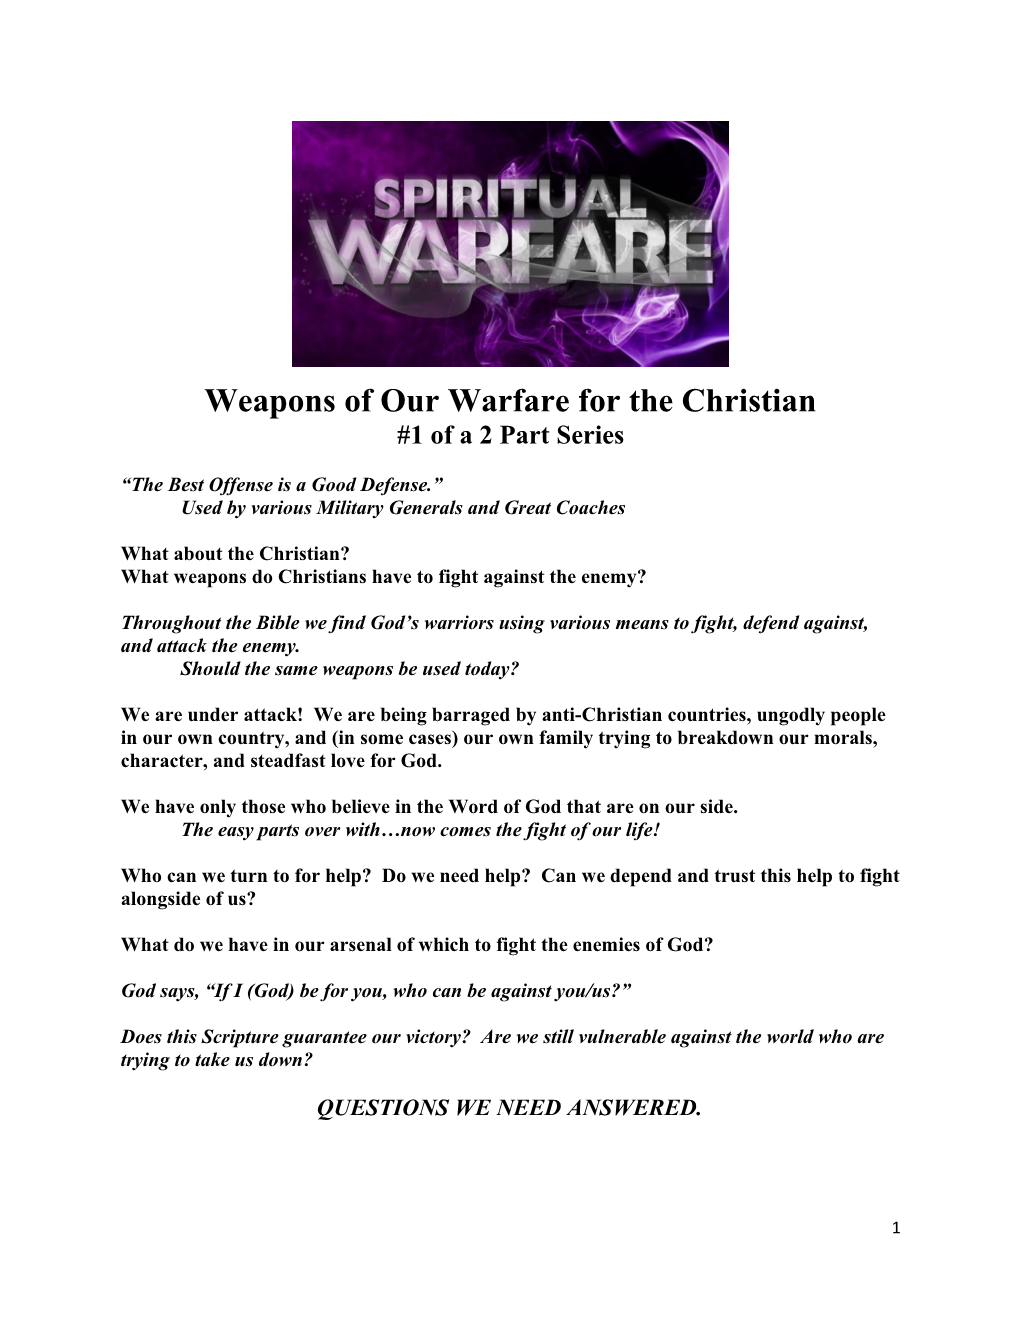 Weapons of Our Warfare for the Christian